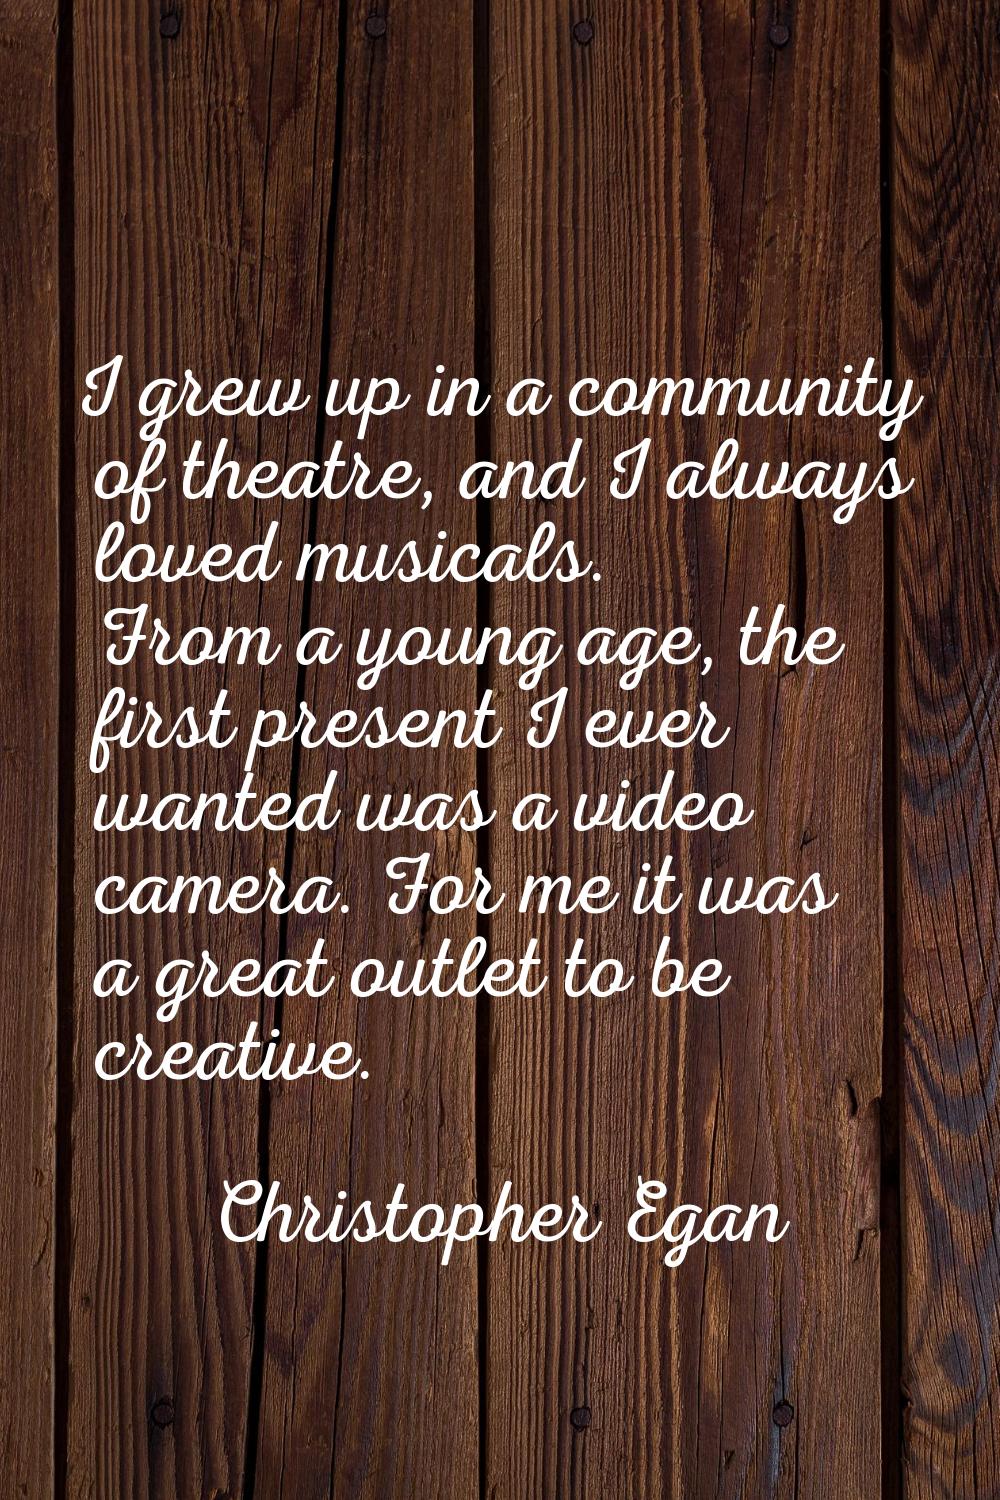 I grew up in a community of theatre, and I always loved musicals. From a young age, the first prese